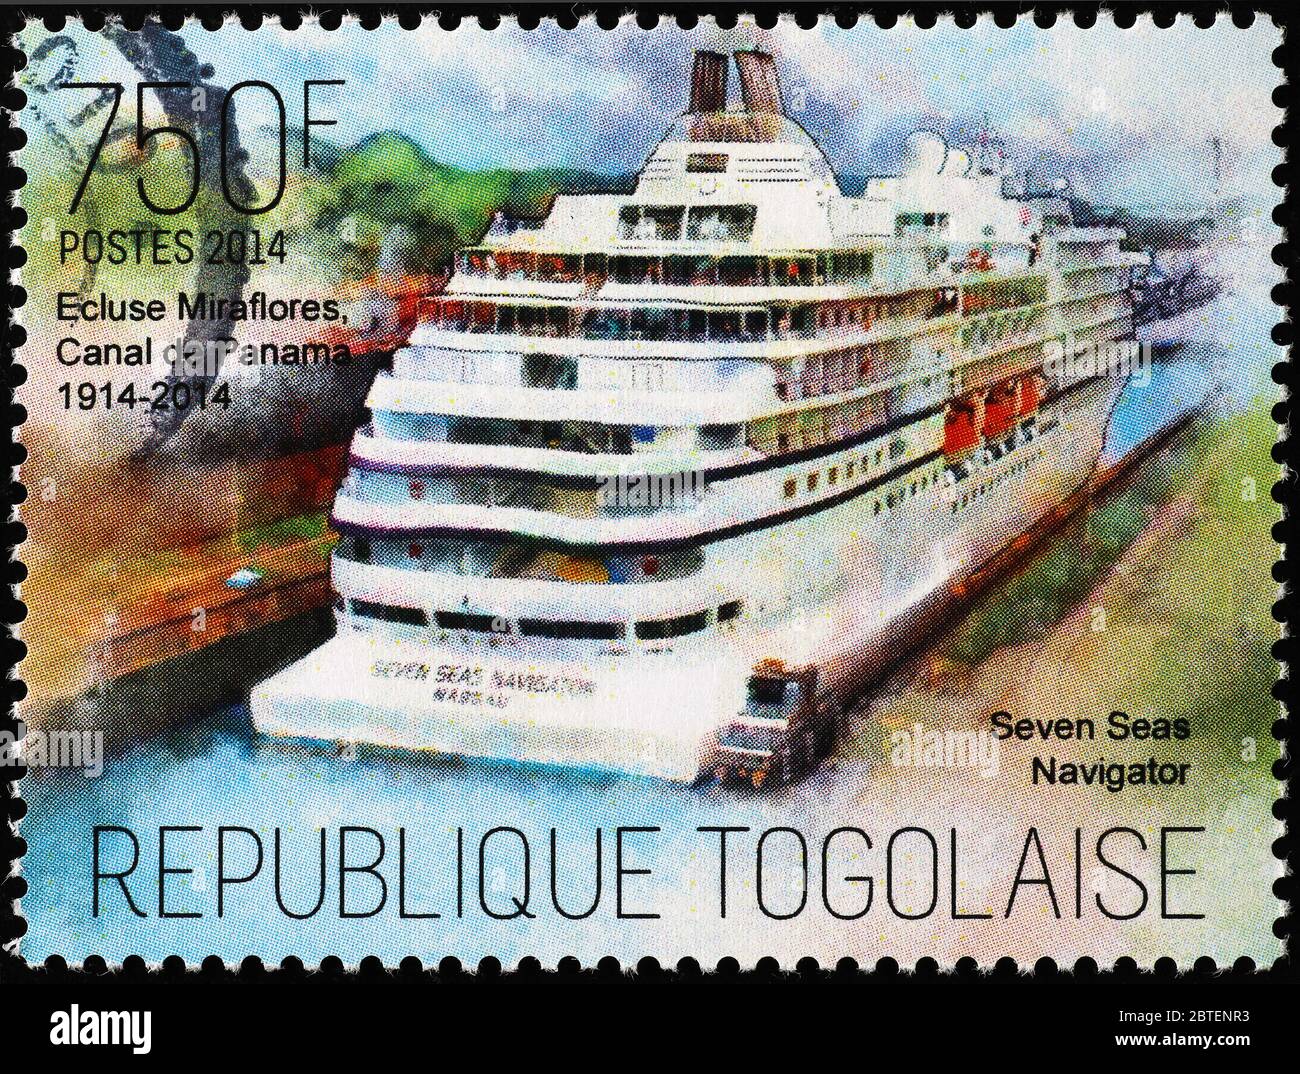 Cruise Seven seas navigator in Panama canal on stamp Stock Photo